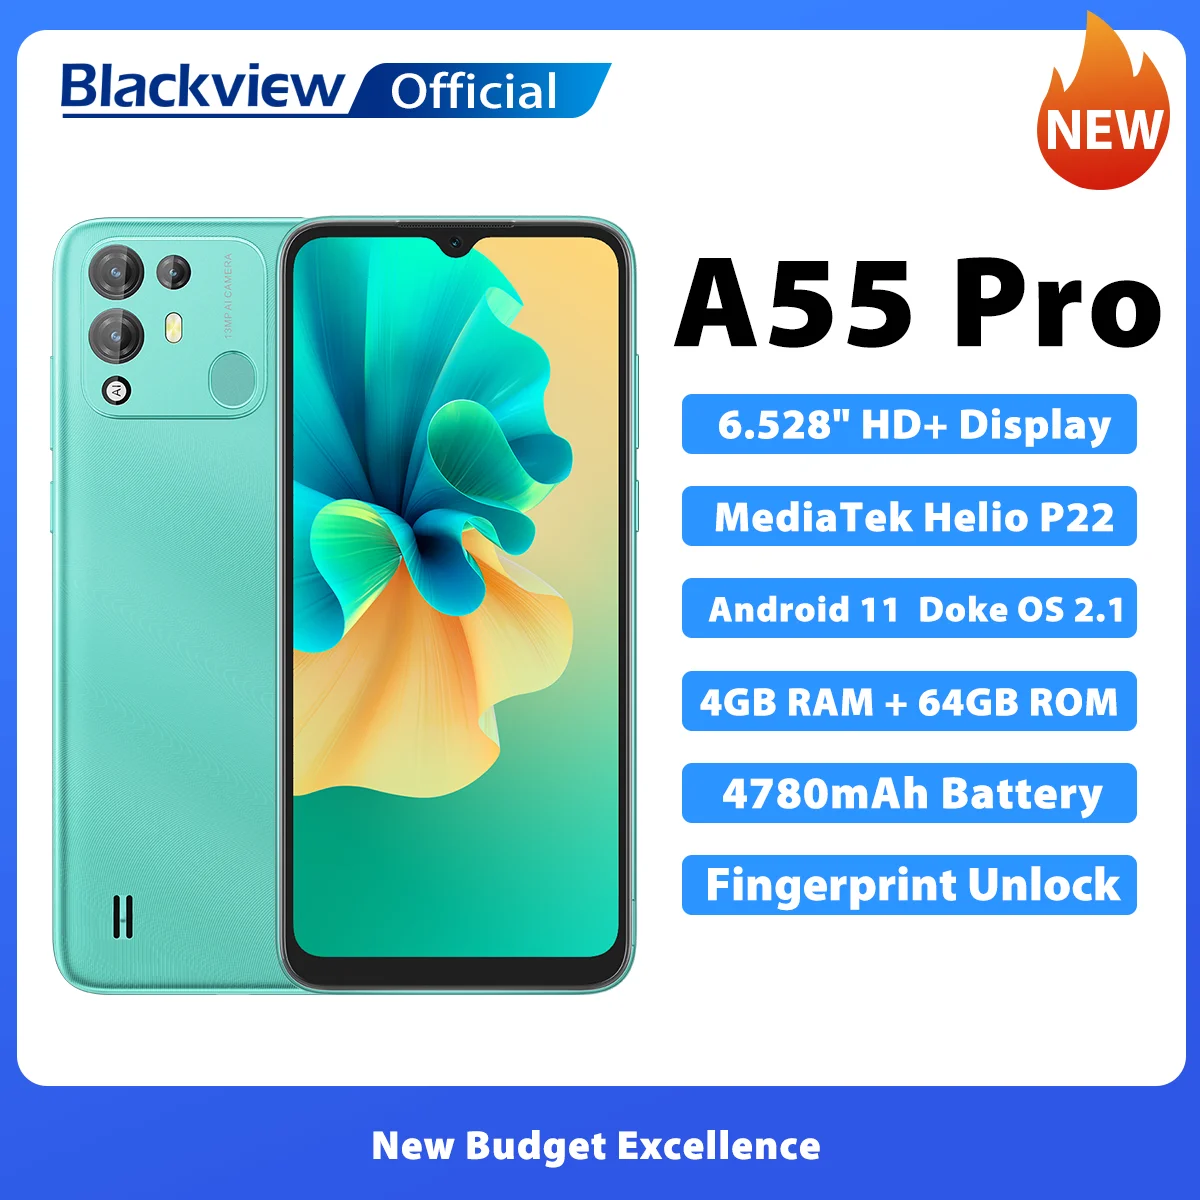 Blackview A55 Pro Smartphone Android 11 6.528